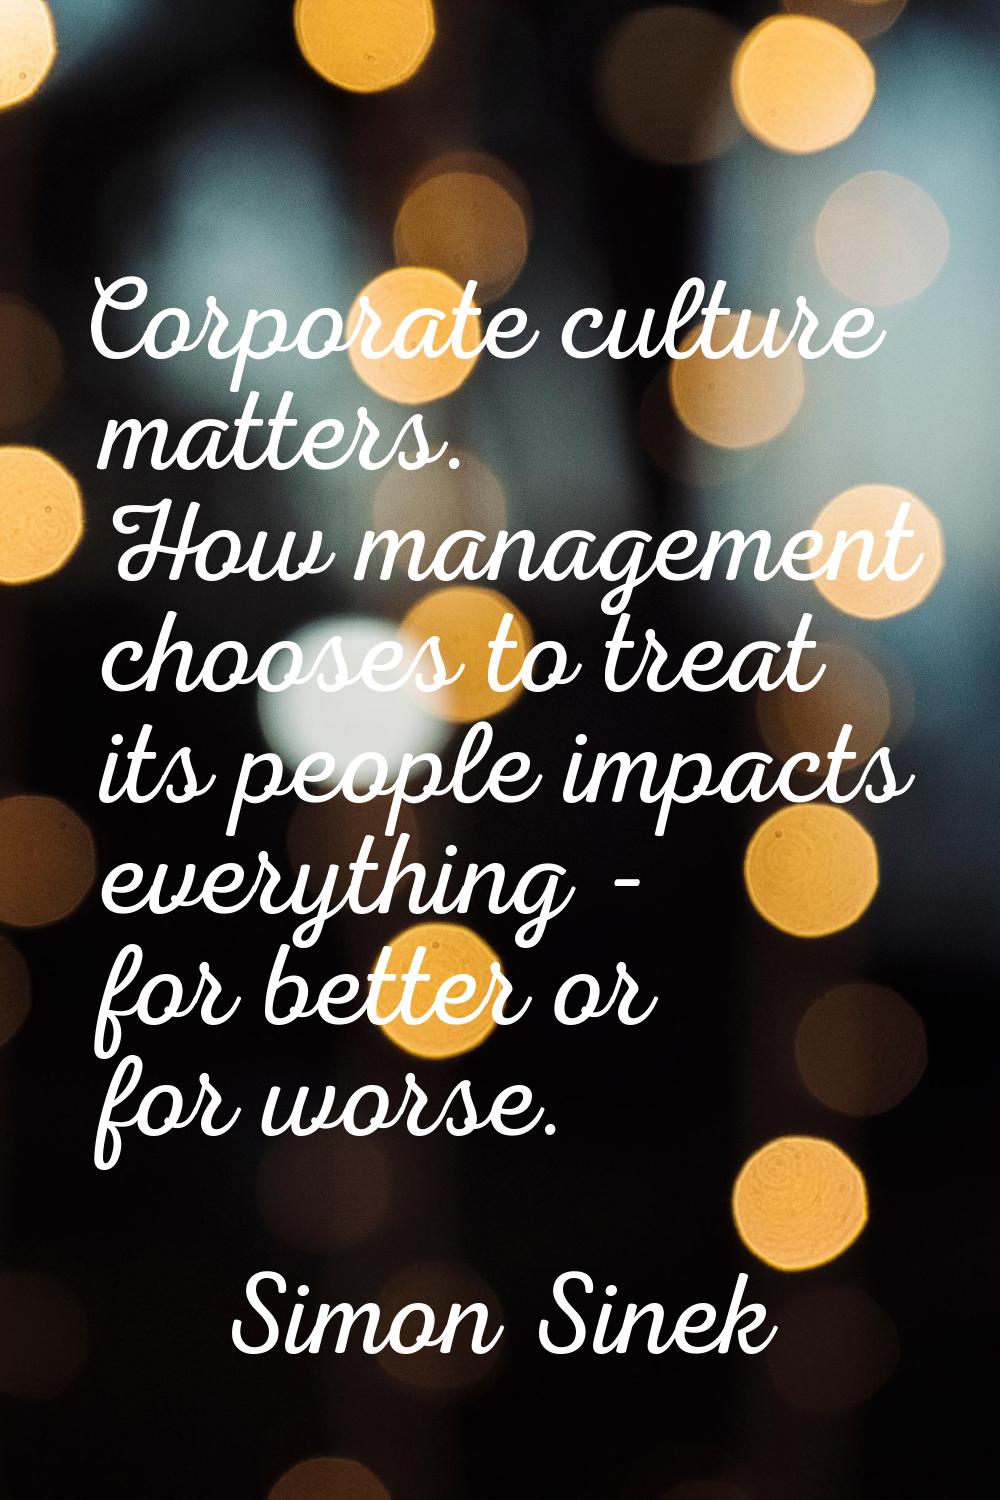 Corporate culture matters. How management chooses to treat its people impacts everything - for bett